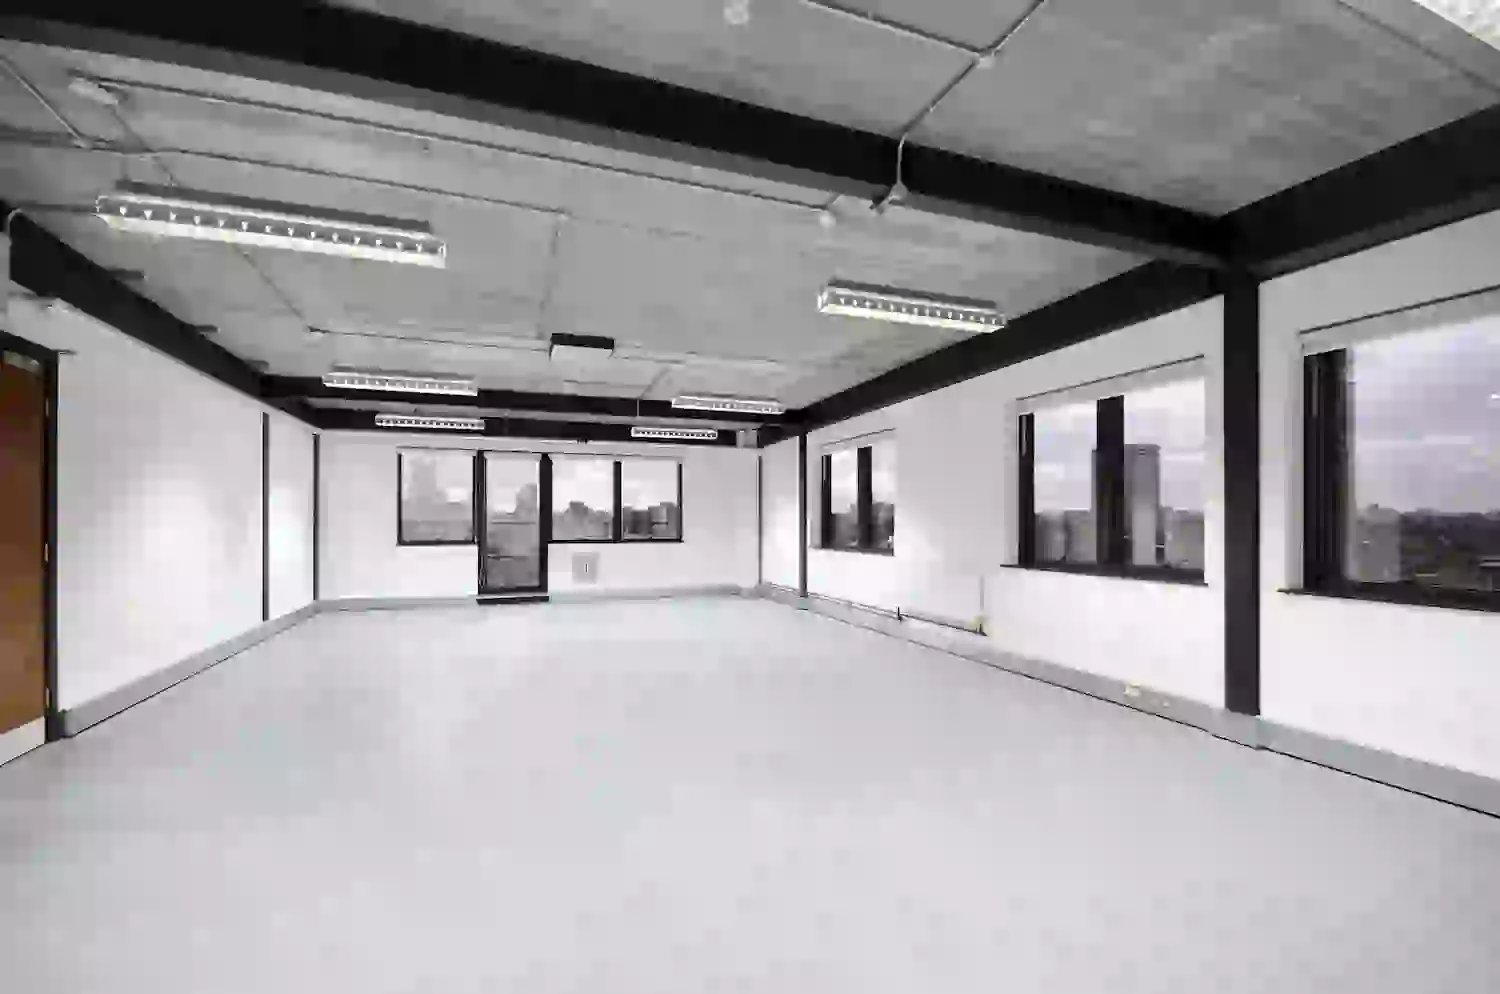 Office space to rent at Pill Box, 115 Coventry Road, Bethnal Green, London, unit PB.512, 749 sq ft (69 sq m).